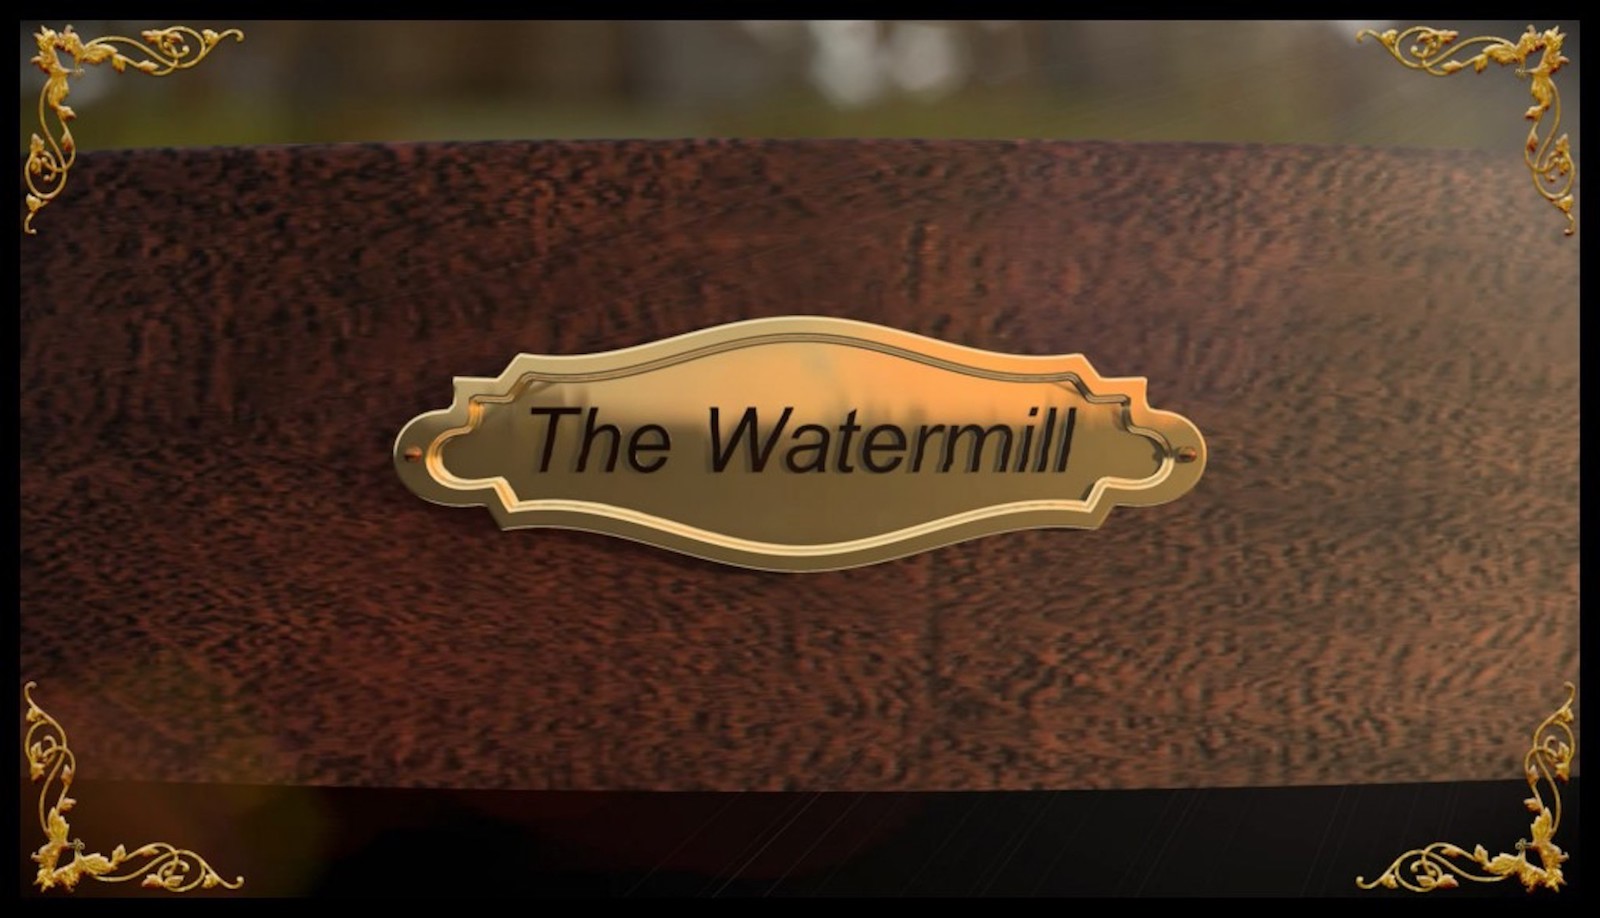 Making of The Watermill